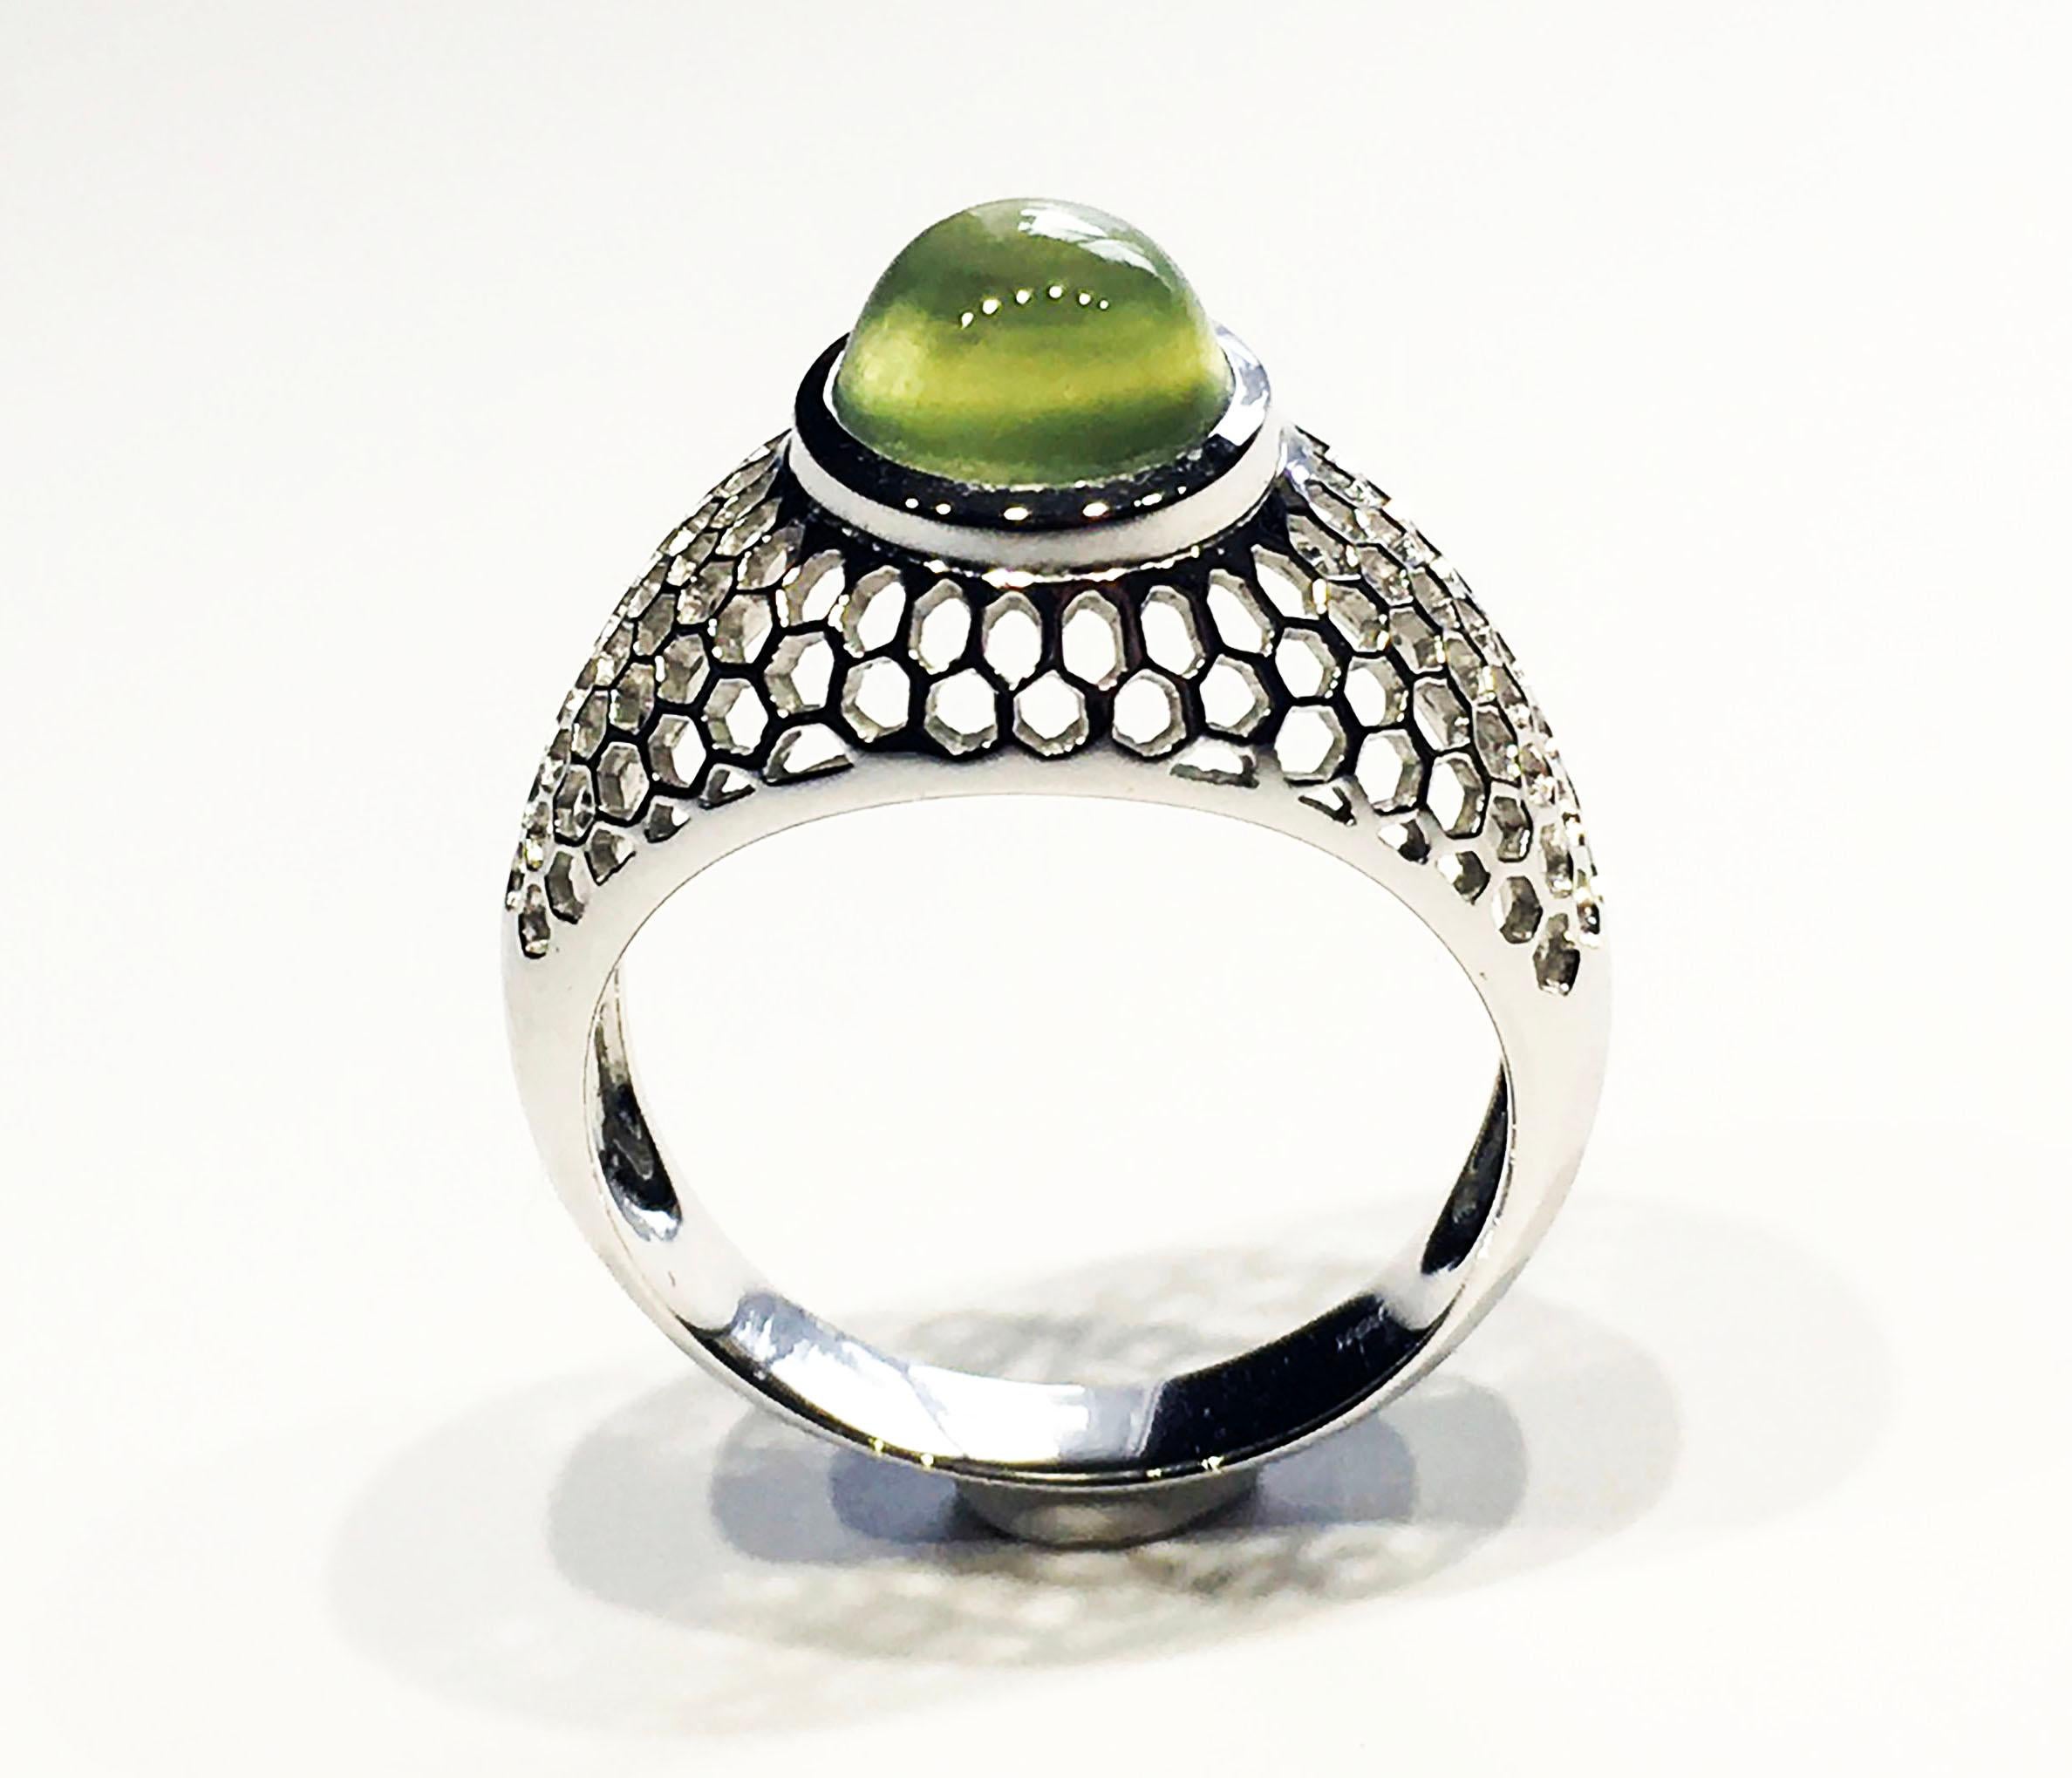 An Green Zambian Prehnite Cabochon Ring set in 18kt White Gold For Sale 3